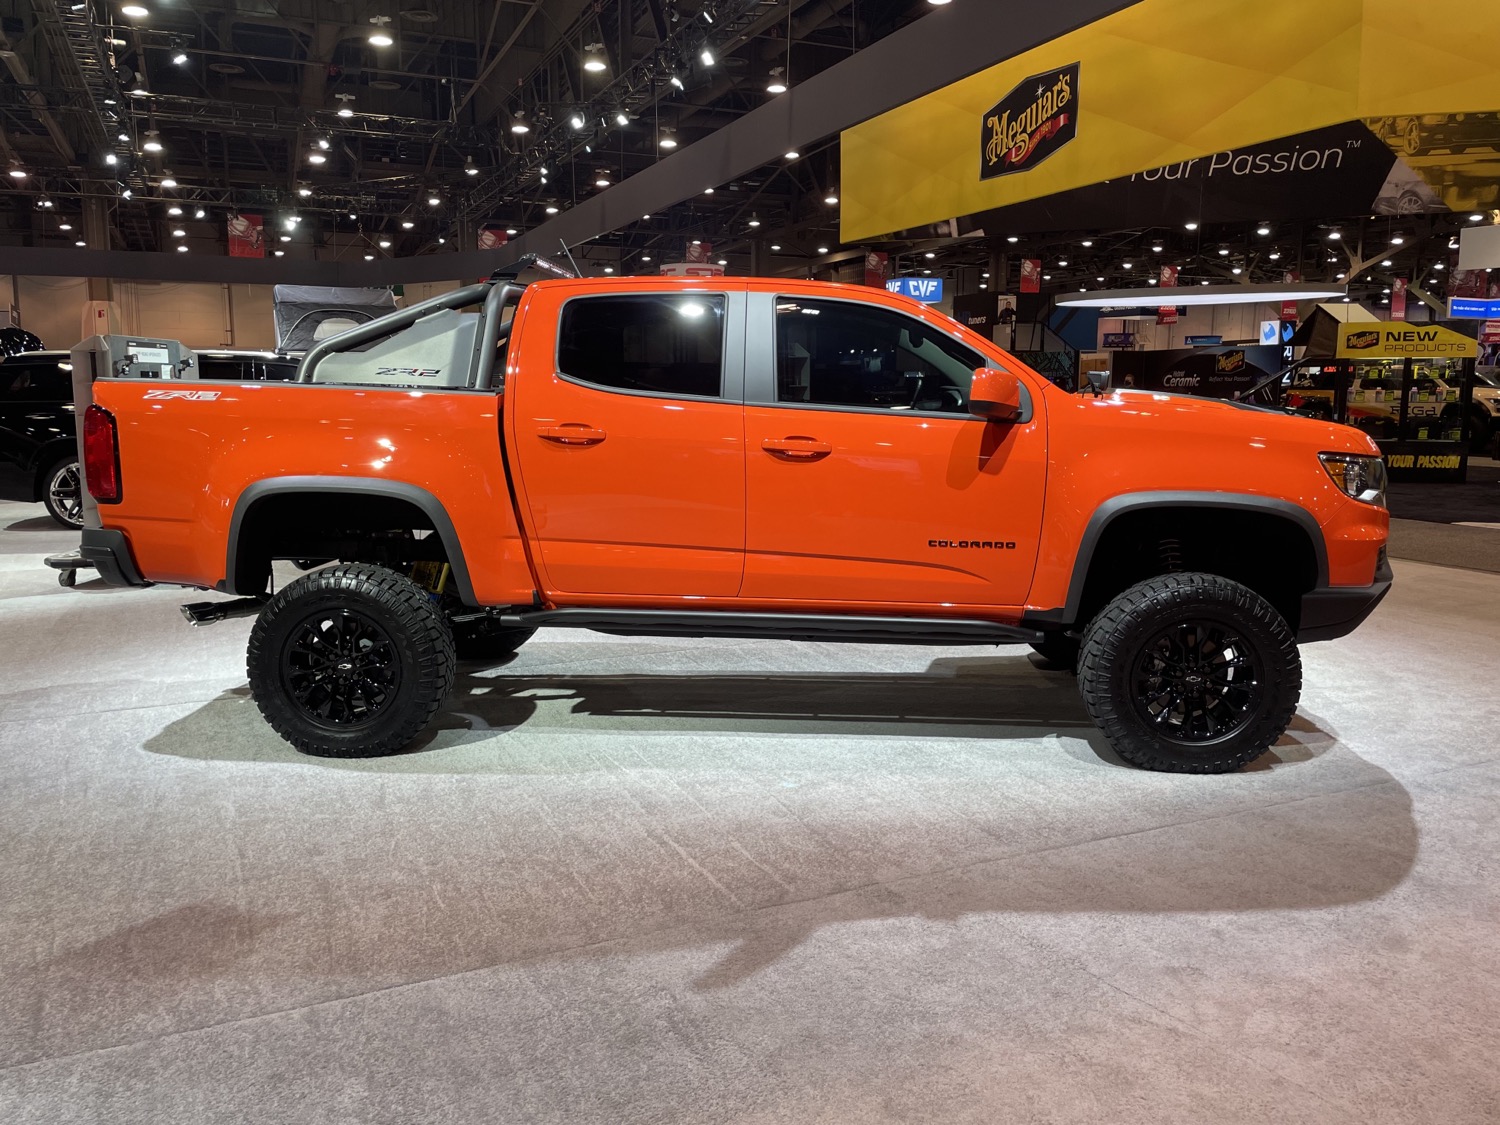 2022 Chevy Colorado ZR2 Extreme Off-Road: Live Photo Gallery